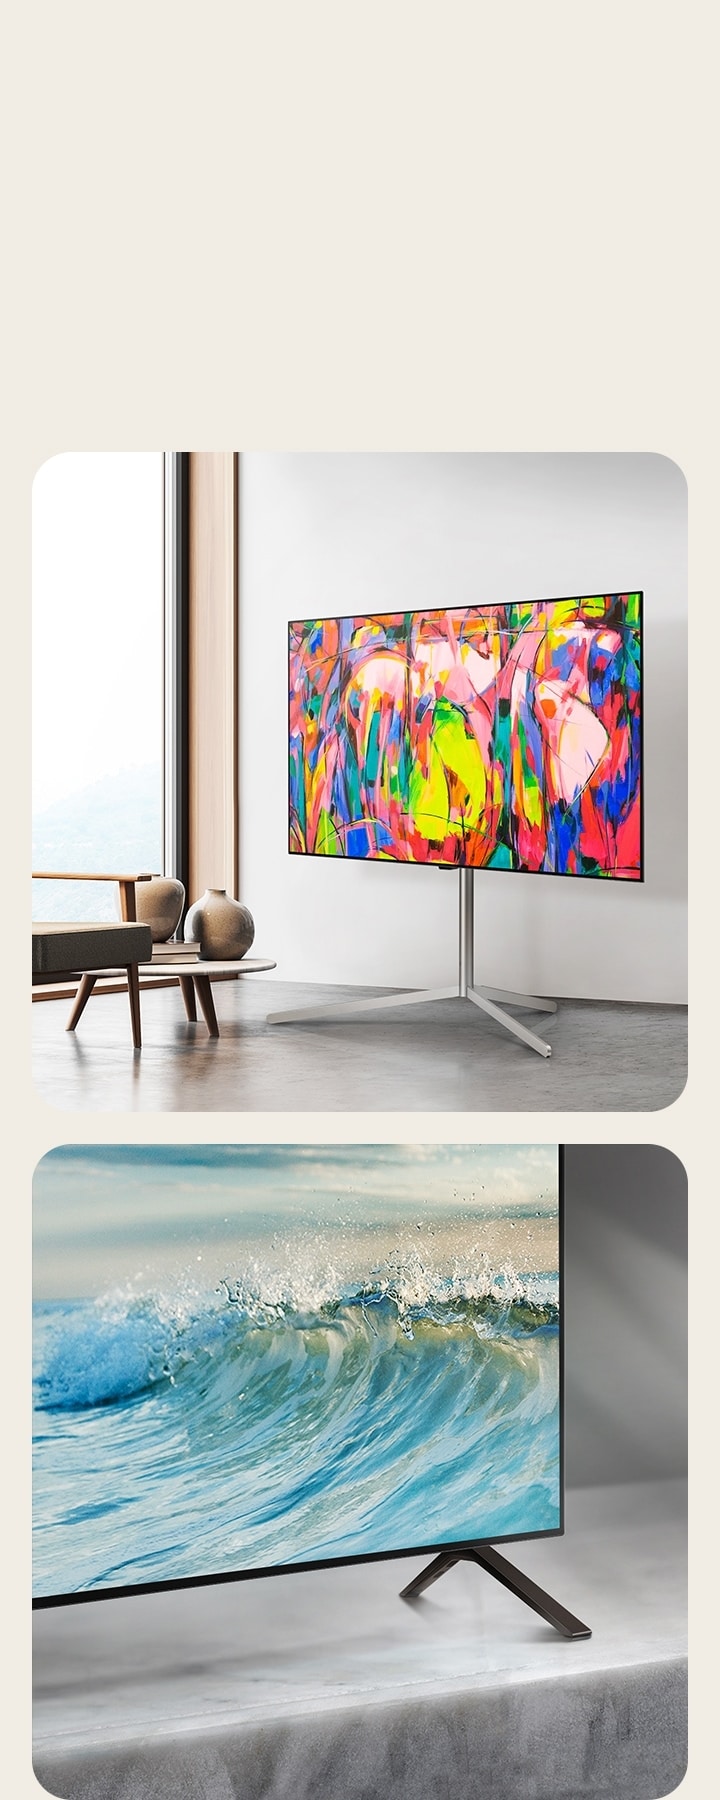 LG OLED B4's stand on top of a marble surface. An image of a pale blue wave is on the screen.  An image of LG OLED B4 on a stand in a minimalist space